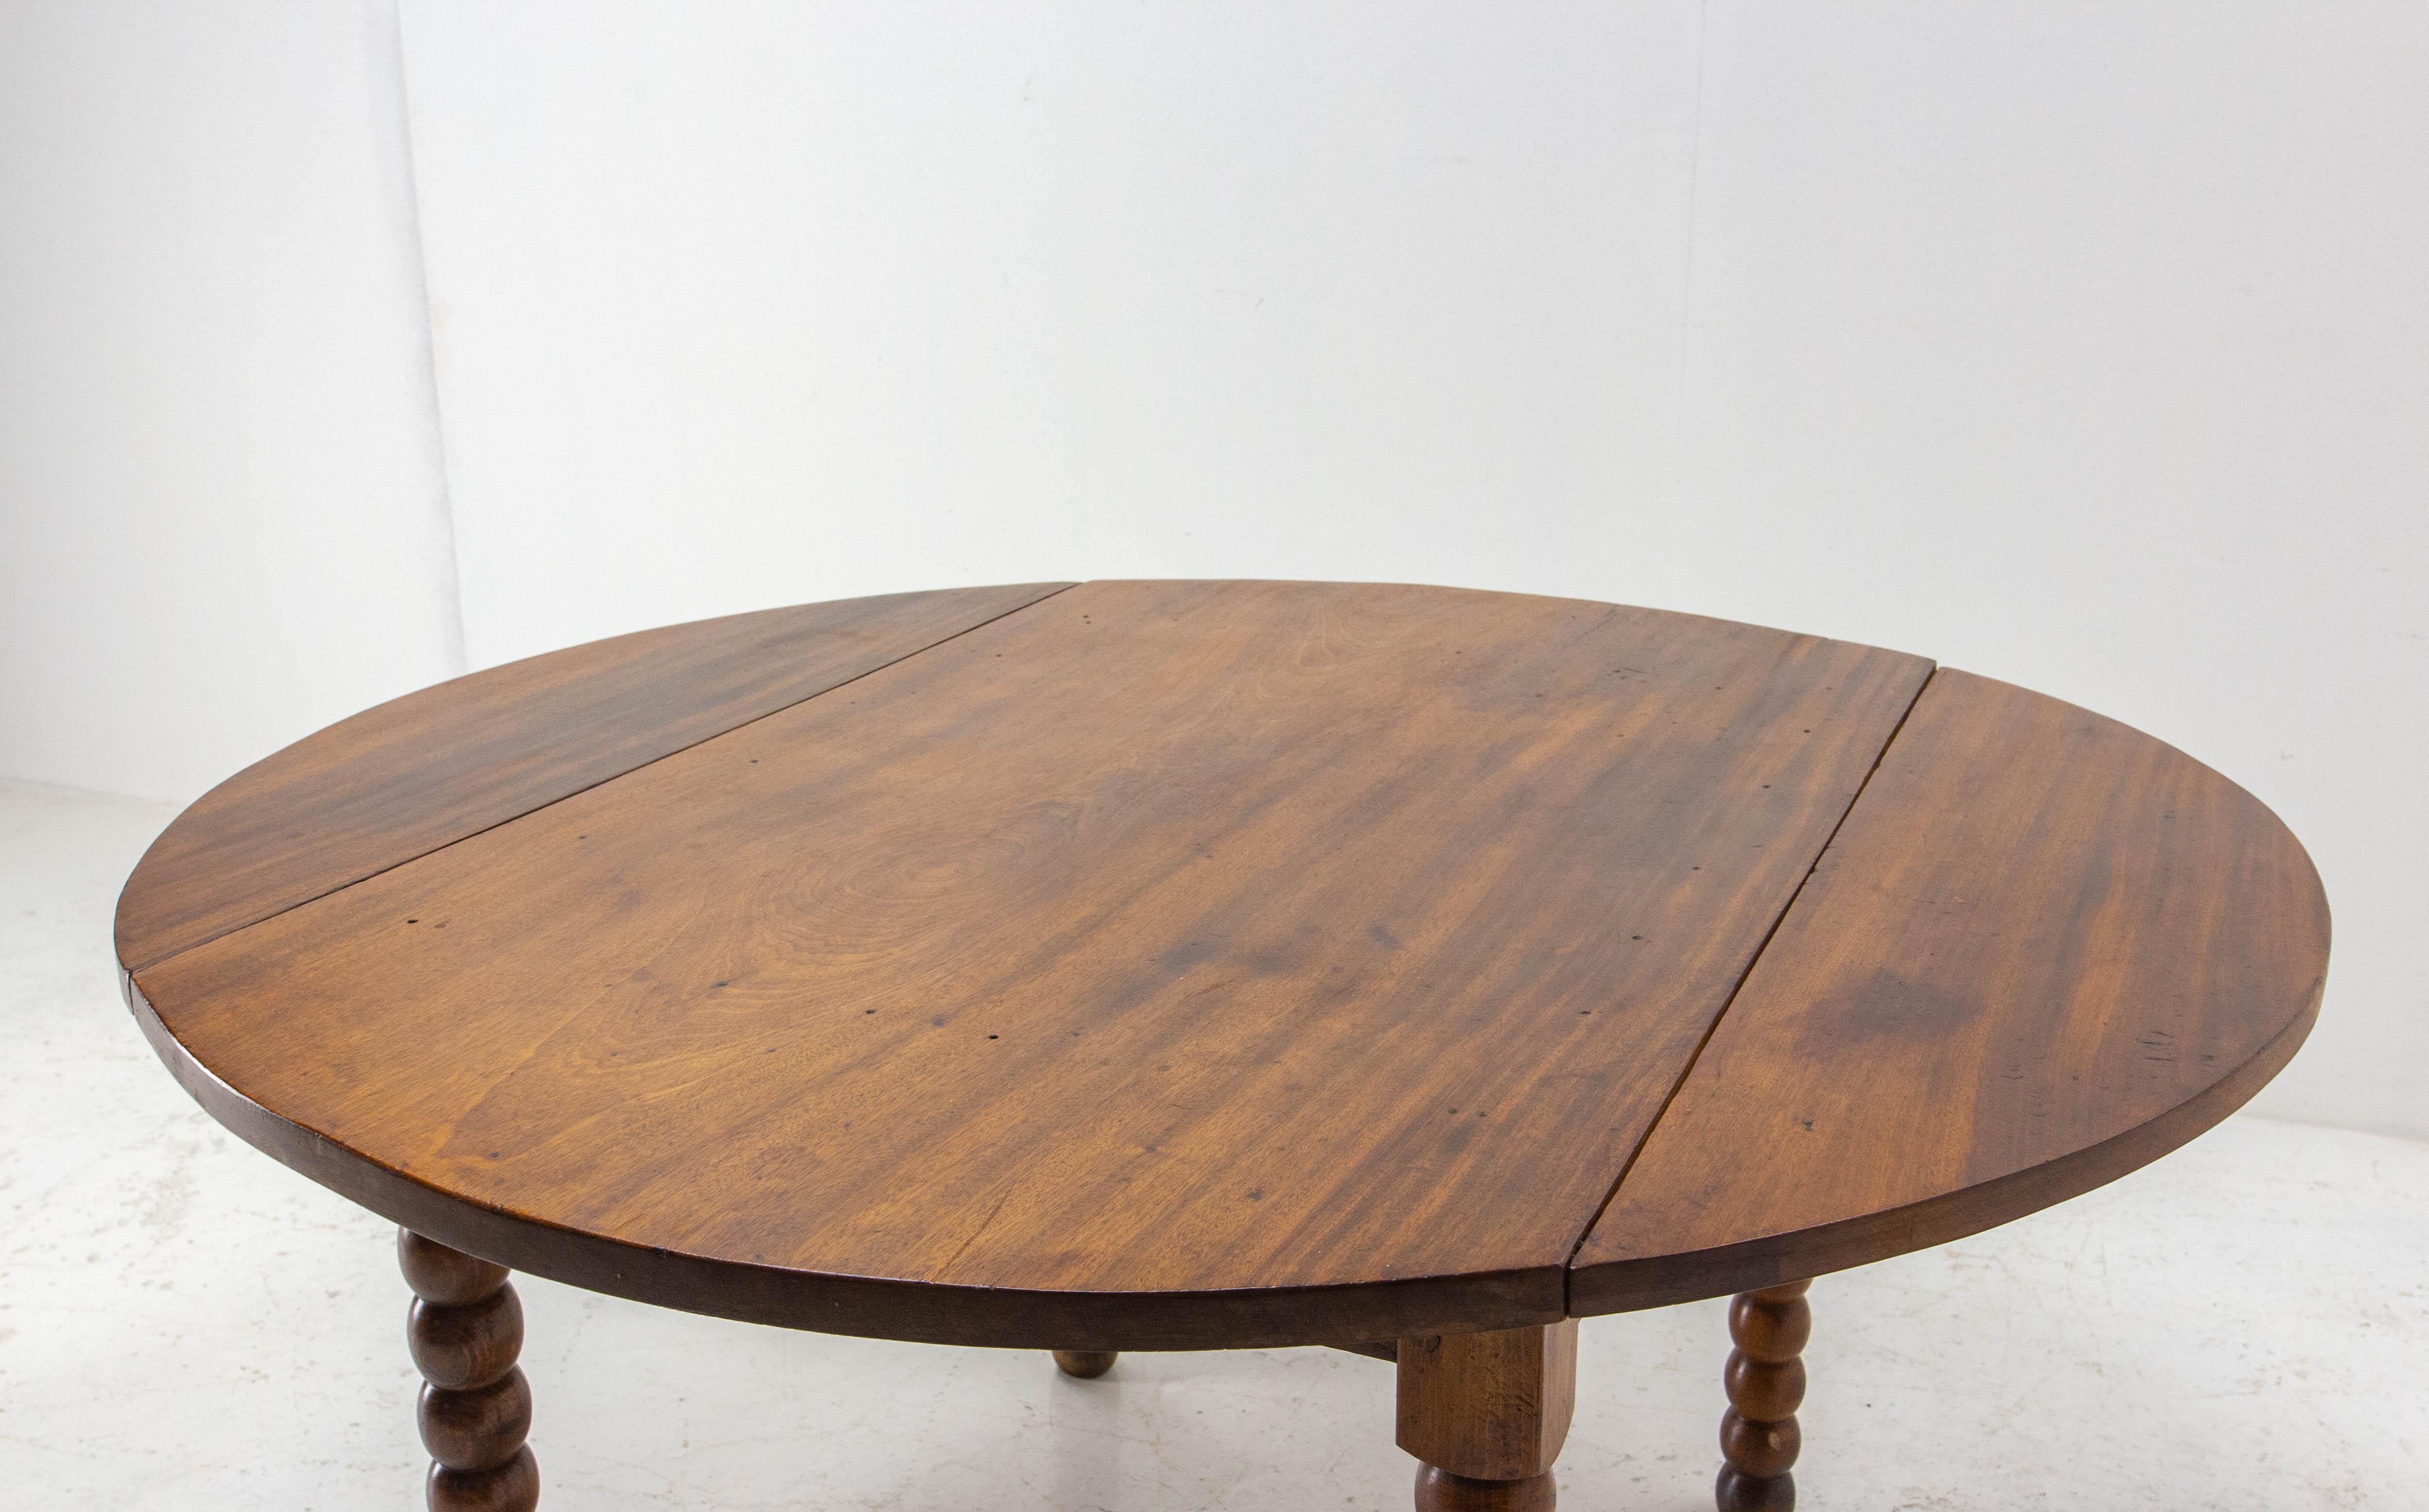 Beech French Round Dining Table Drop Leaves, Turned Legs, circa 1940